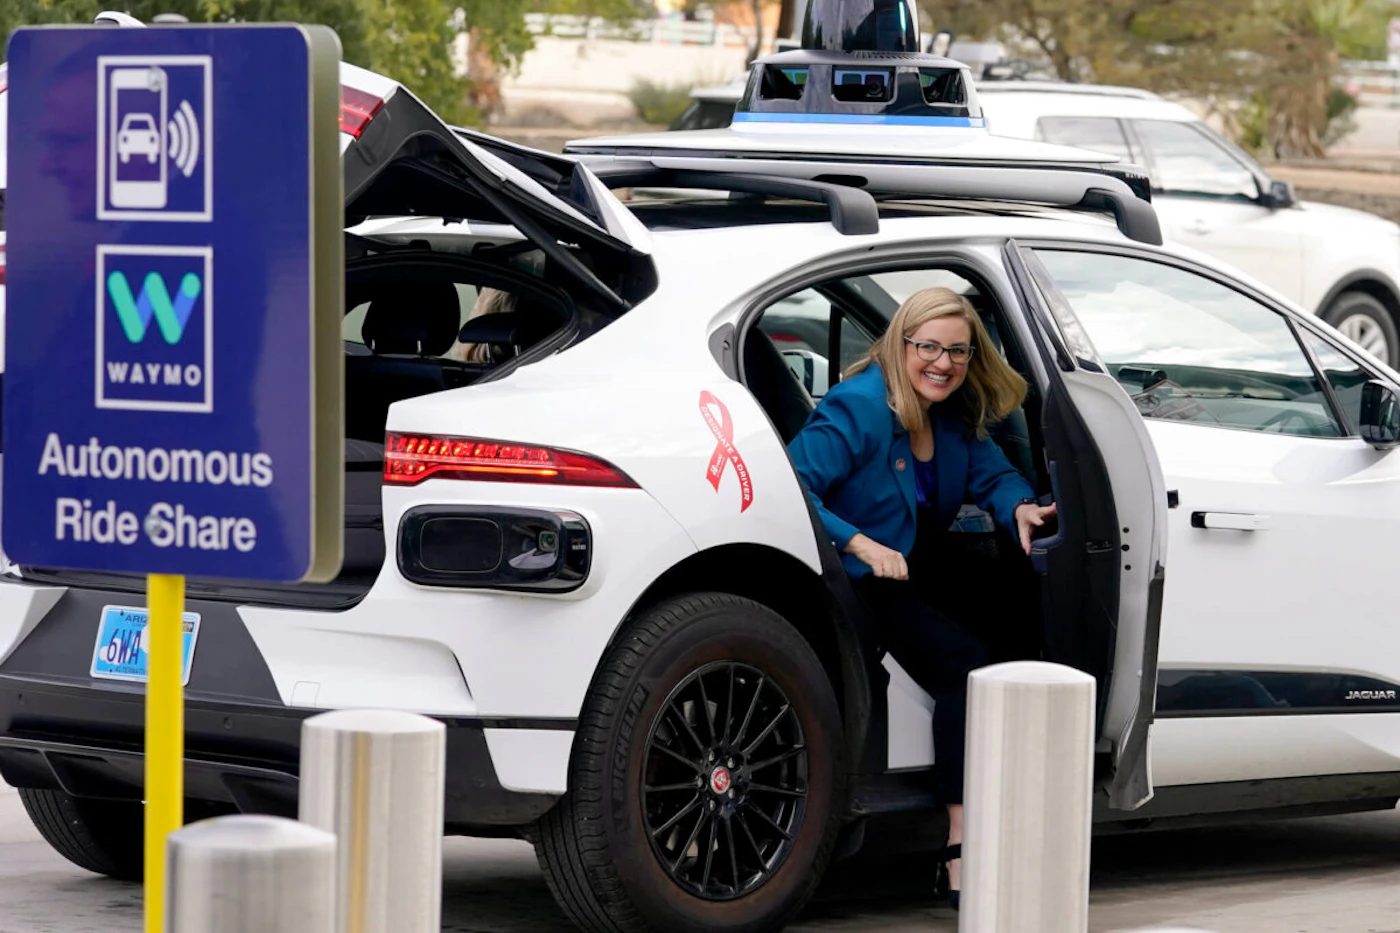 FILE - Phoenix Mayor Kate Gallego arrives in a Waymo self-driving vehicle on Dec. 16, 2022, at the Sky Harbor International Airport Sky Train facility in Phoenix. Self-driving car pioneer Waymo announced Thursday, May 4, 2023, that its robotaxis will be able to carry passengers through most of the Phoenix area for the first time. (AP Photo/Matt York, File)